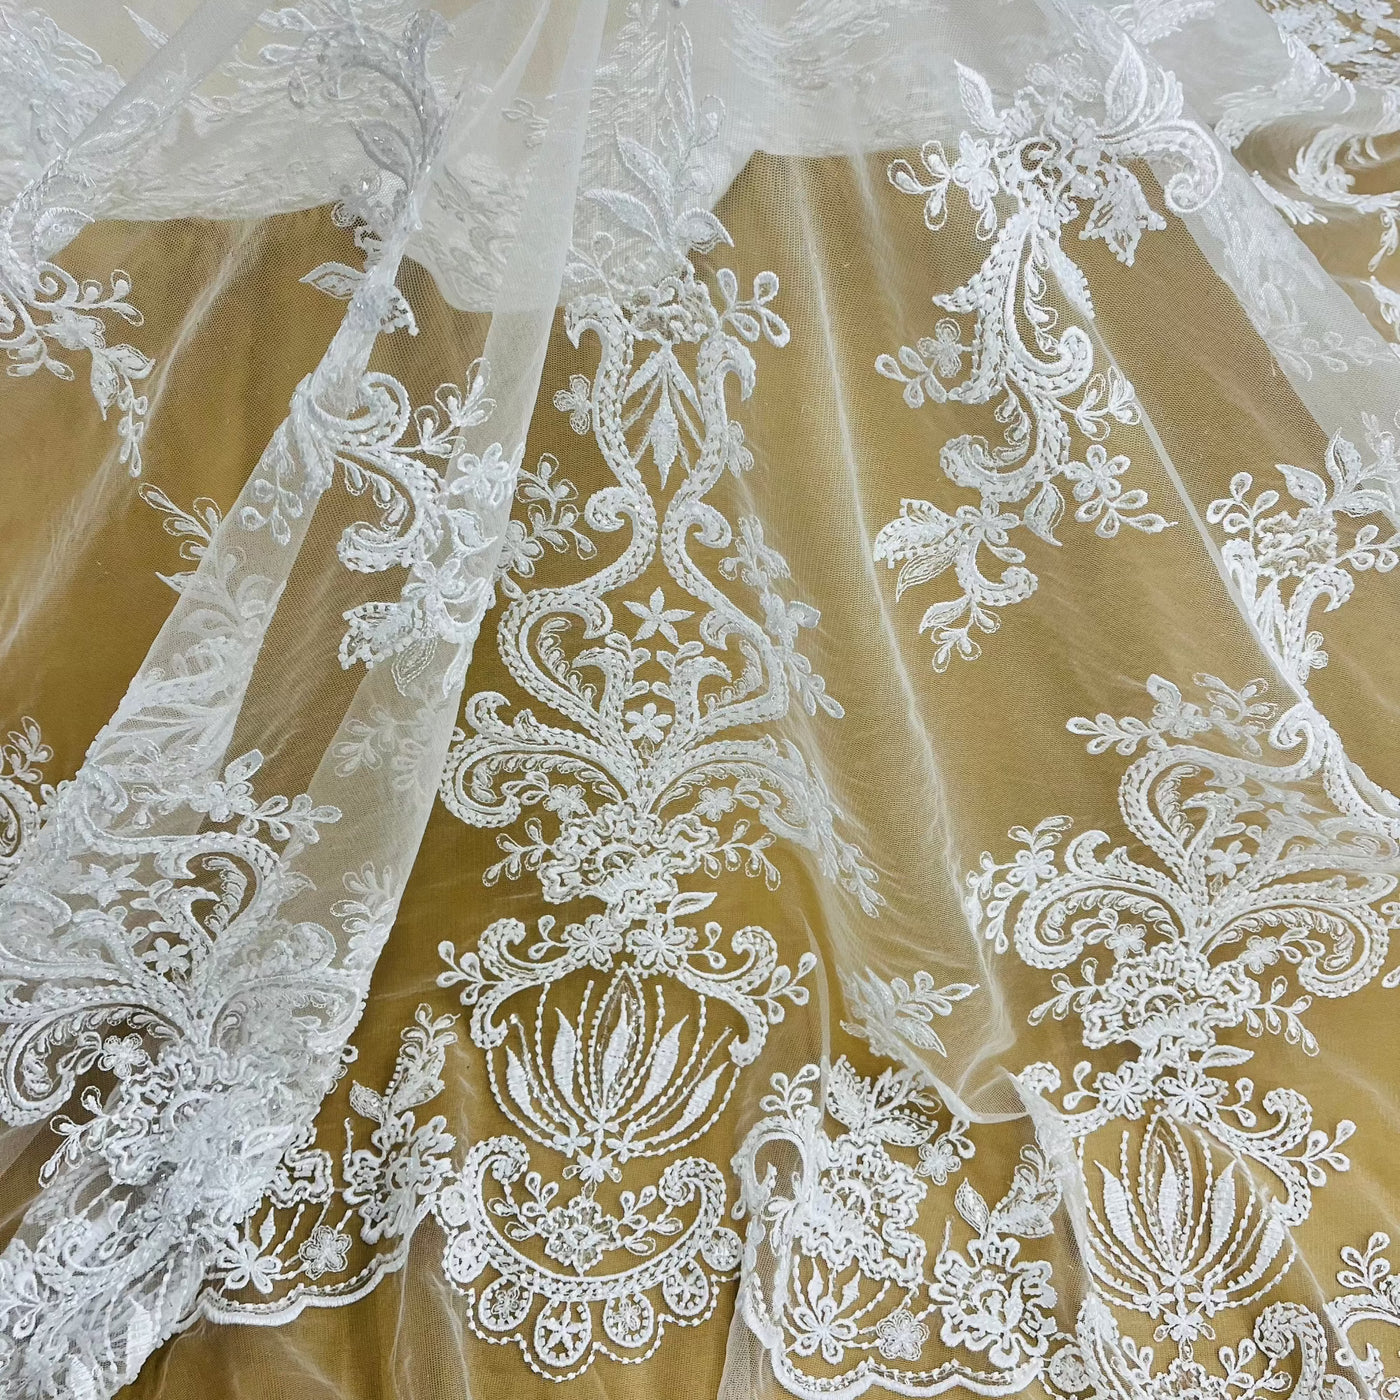 Beaded Lace Fabric Embroidered on 100% Polyester Net Mesh | Lace USA - GD-12186 White